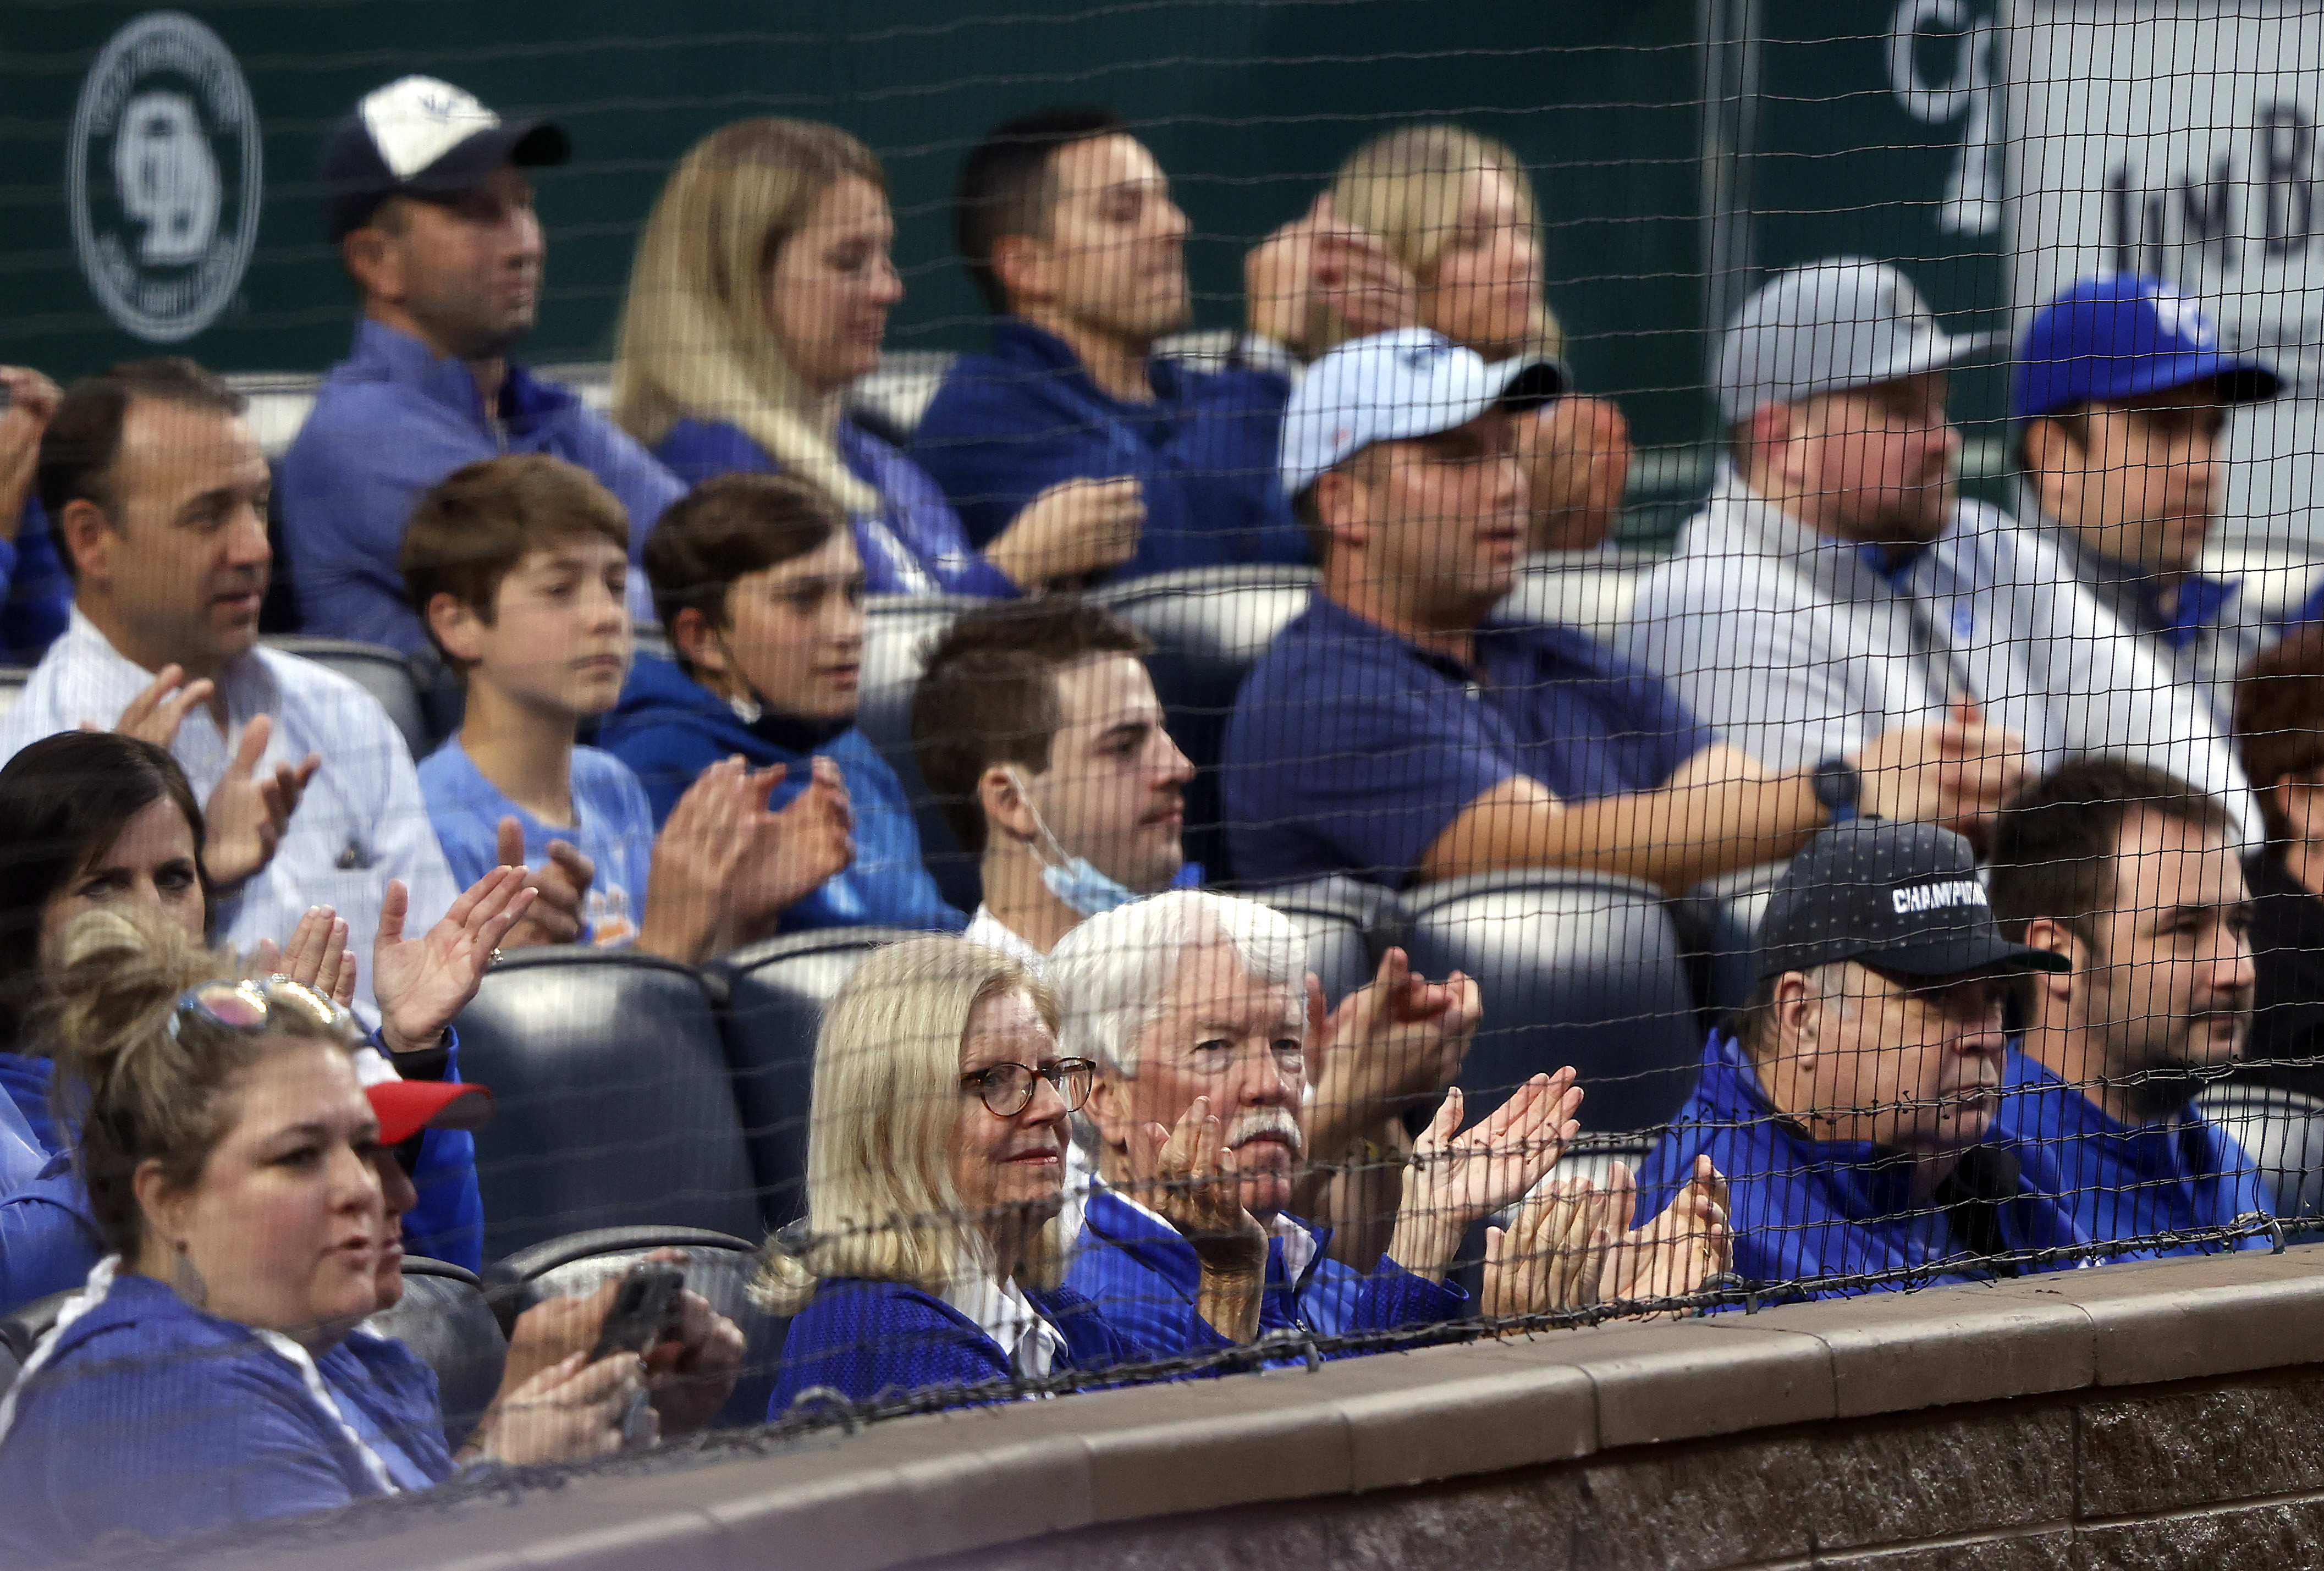 Kansas City Royals owner John Sherman watches from the Crown seats during the game against the Chicago White Sox at Kauffman Stadium on May 07, 2021 in Kansas City, Missouri.